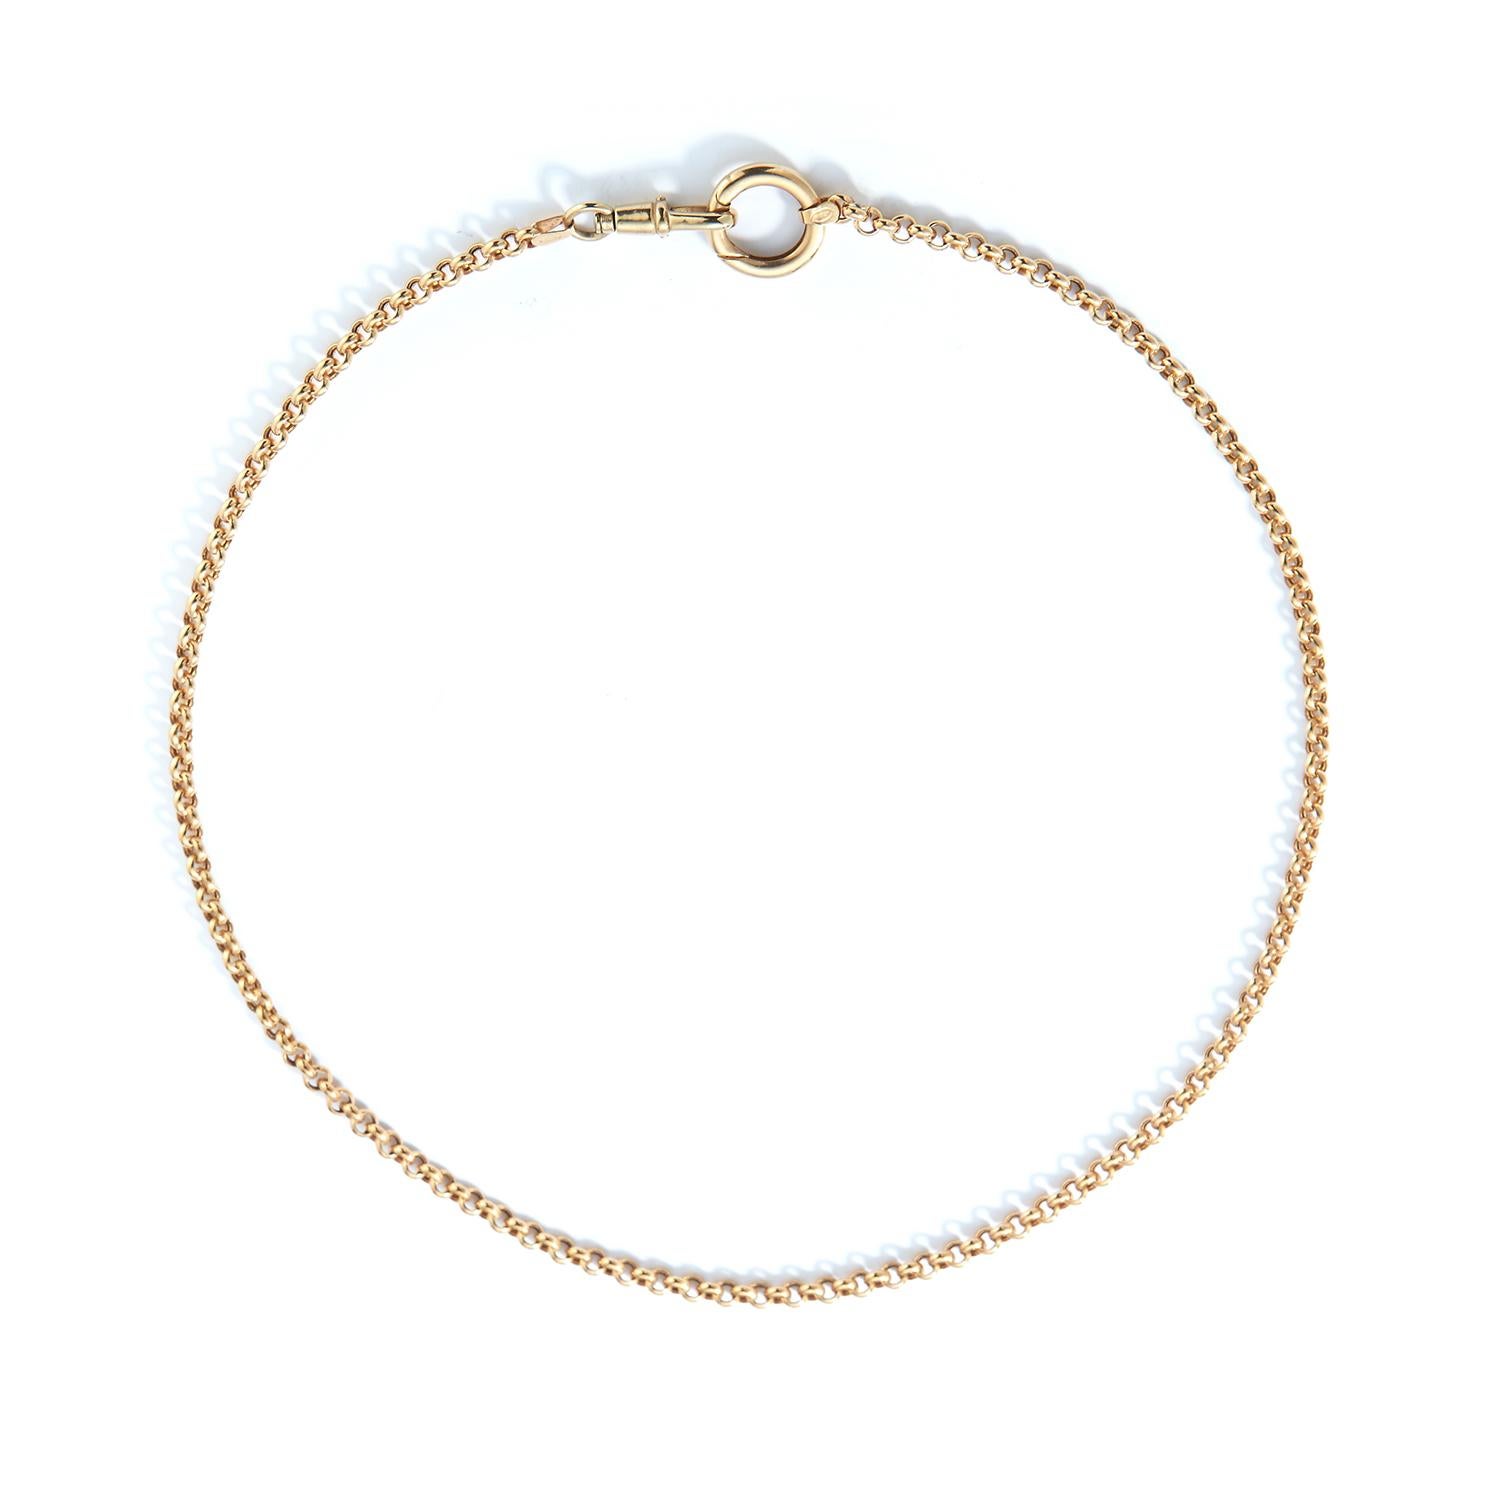 Our antique inspired belcher chain has a bold look and limitless styling options. Each solid gold belcher (rolo) chain is designed with a spinning dog clip at one end and a removable charm ring with spring opening. We thoughtfully designed these